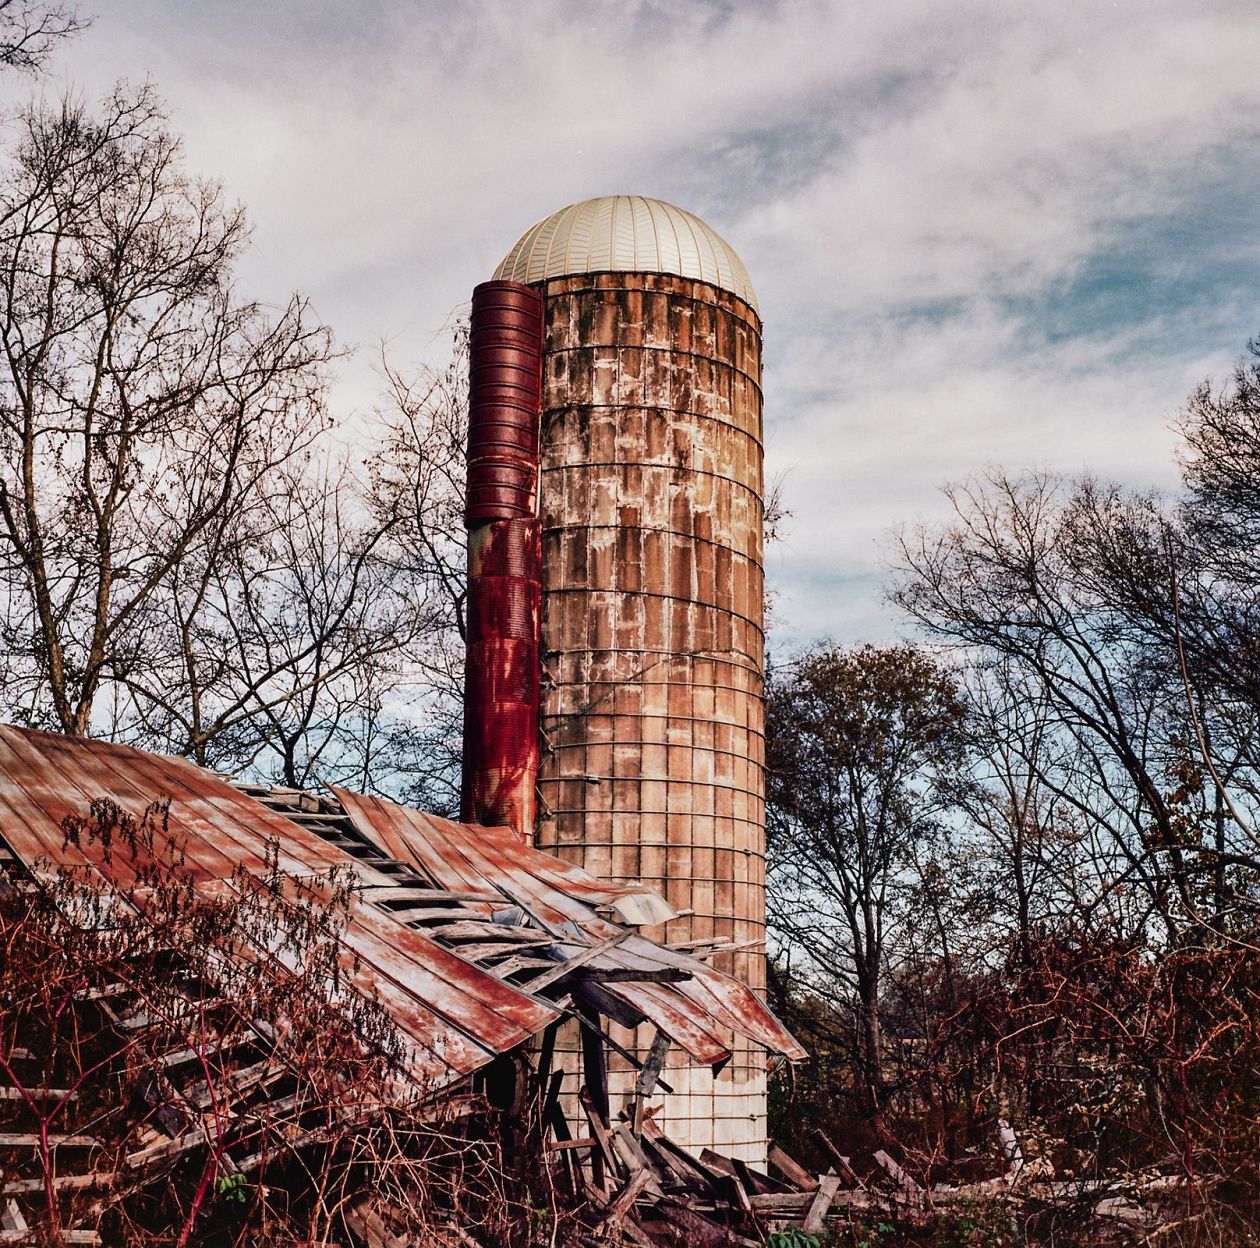 Abandoned grain silo on a background of trees and sky. Tennessee